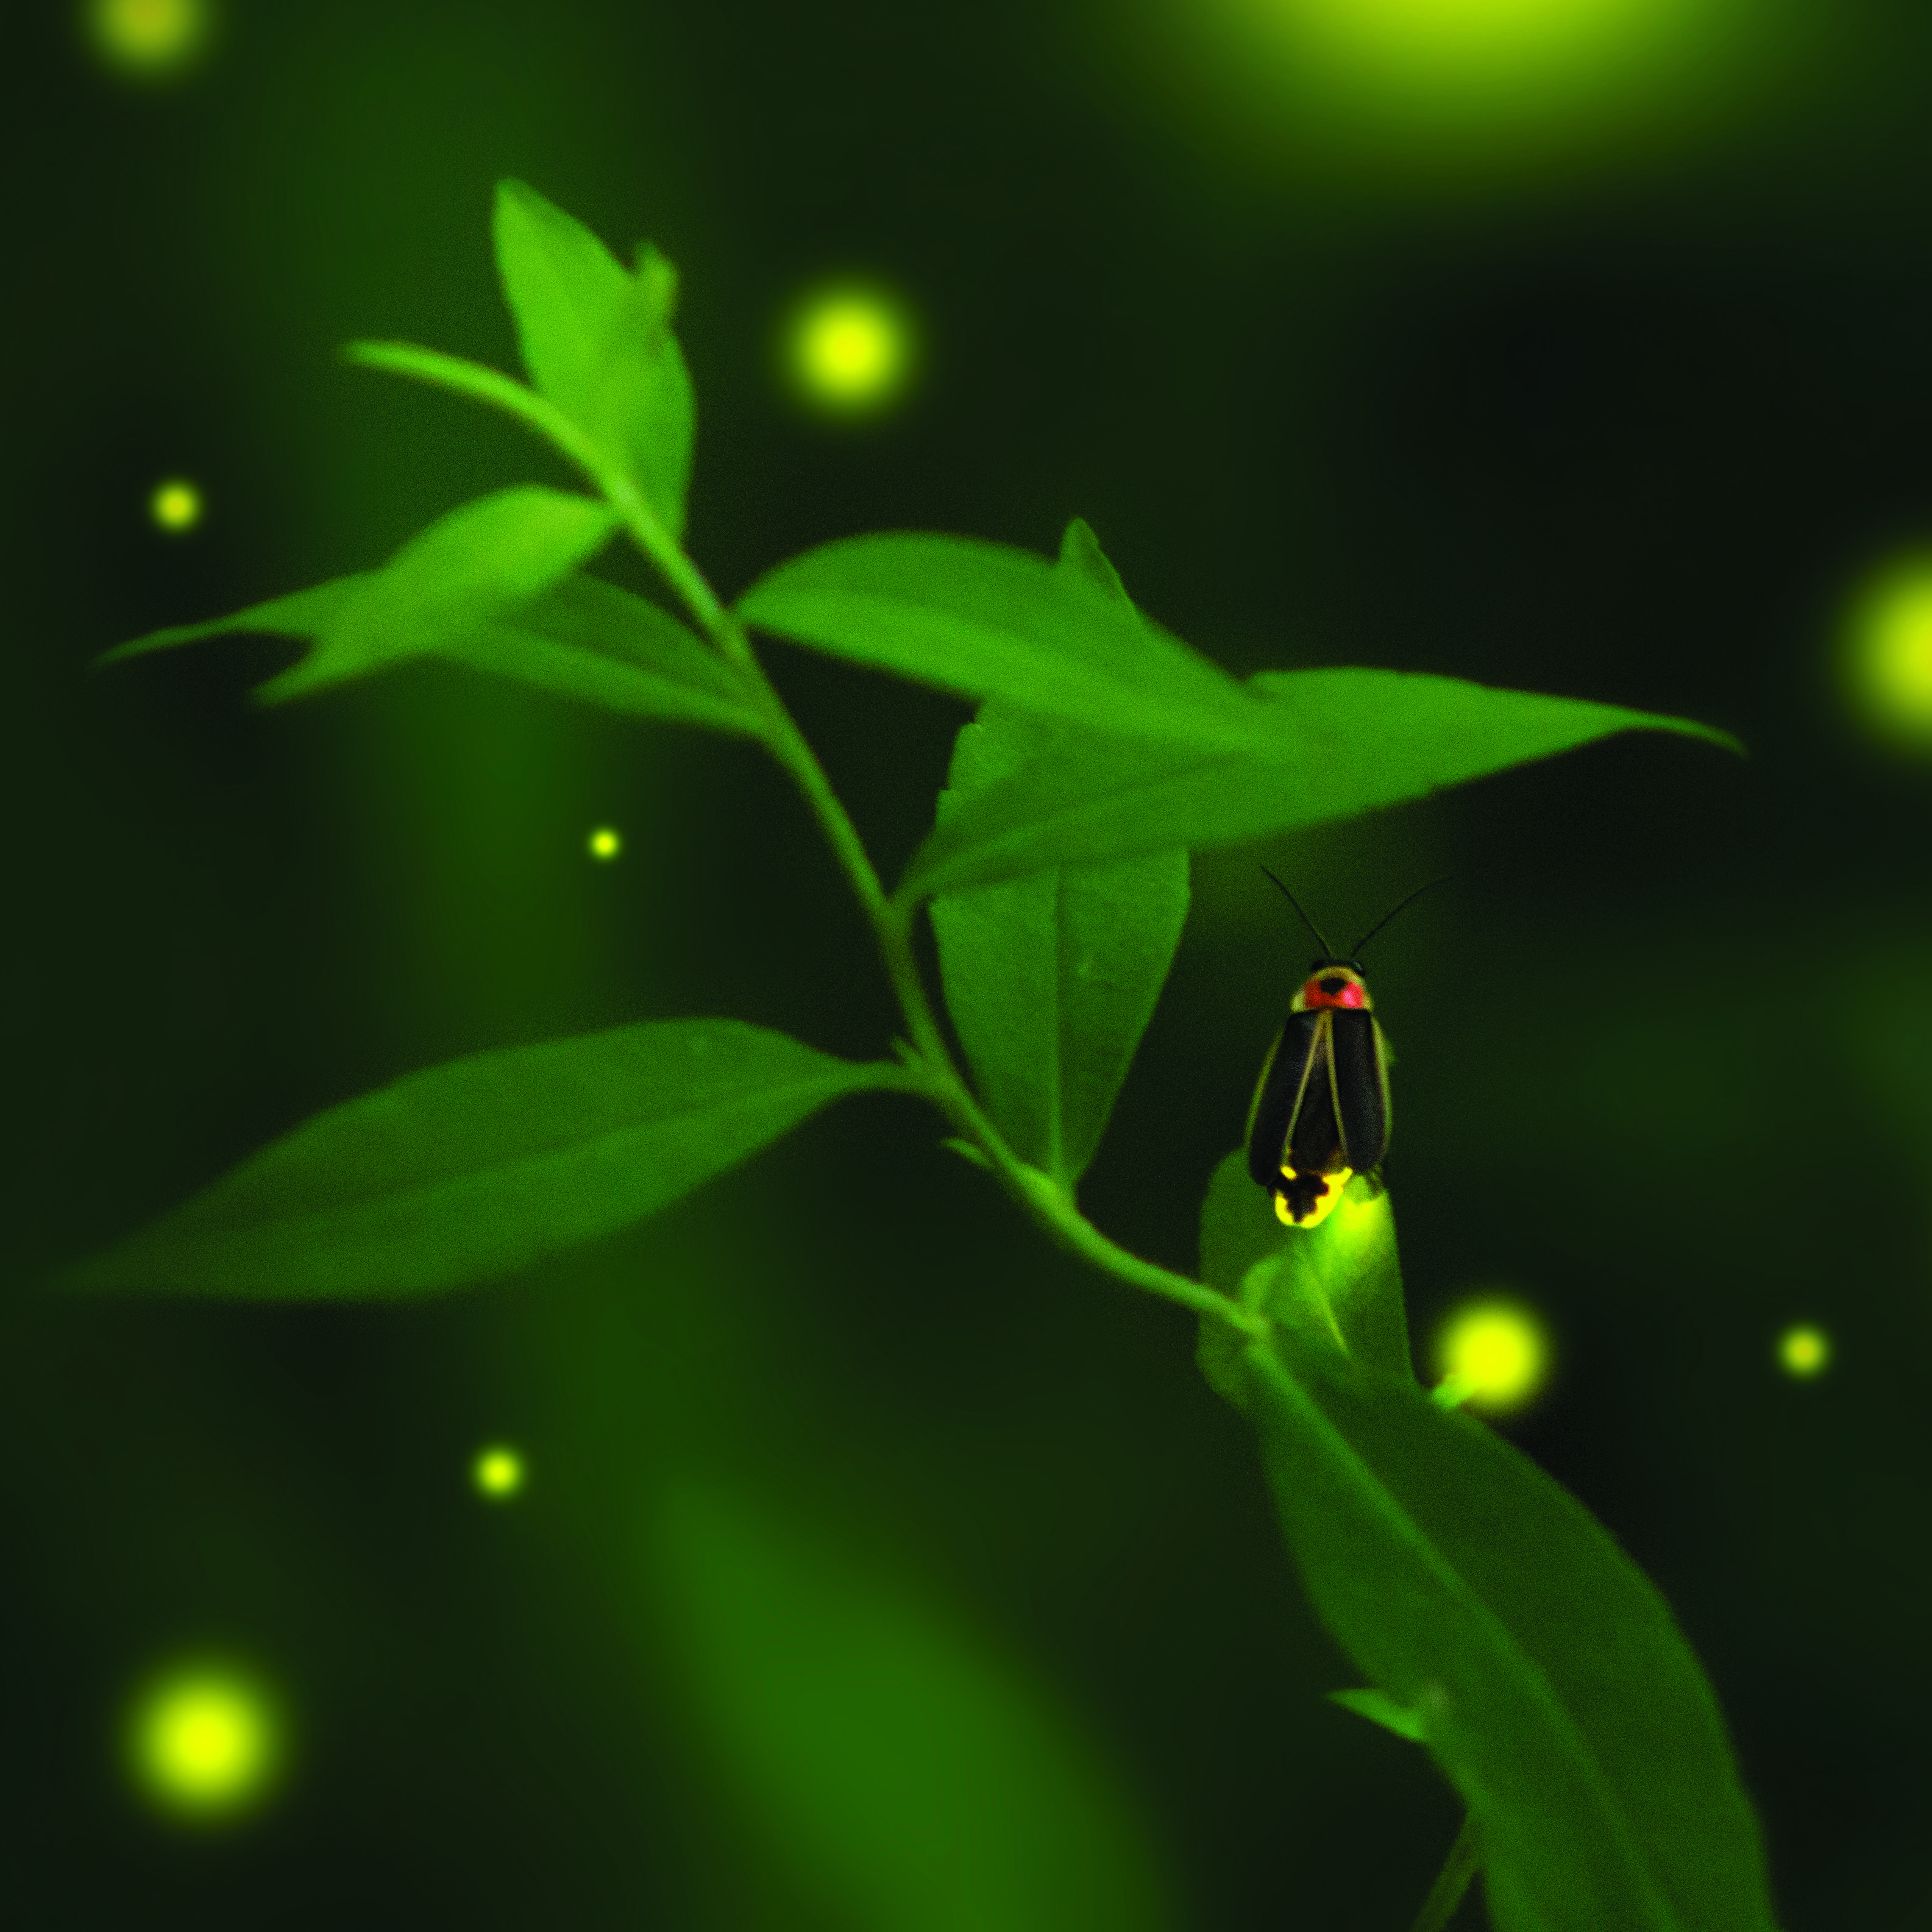 Firefly rests on a leaf.